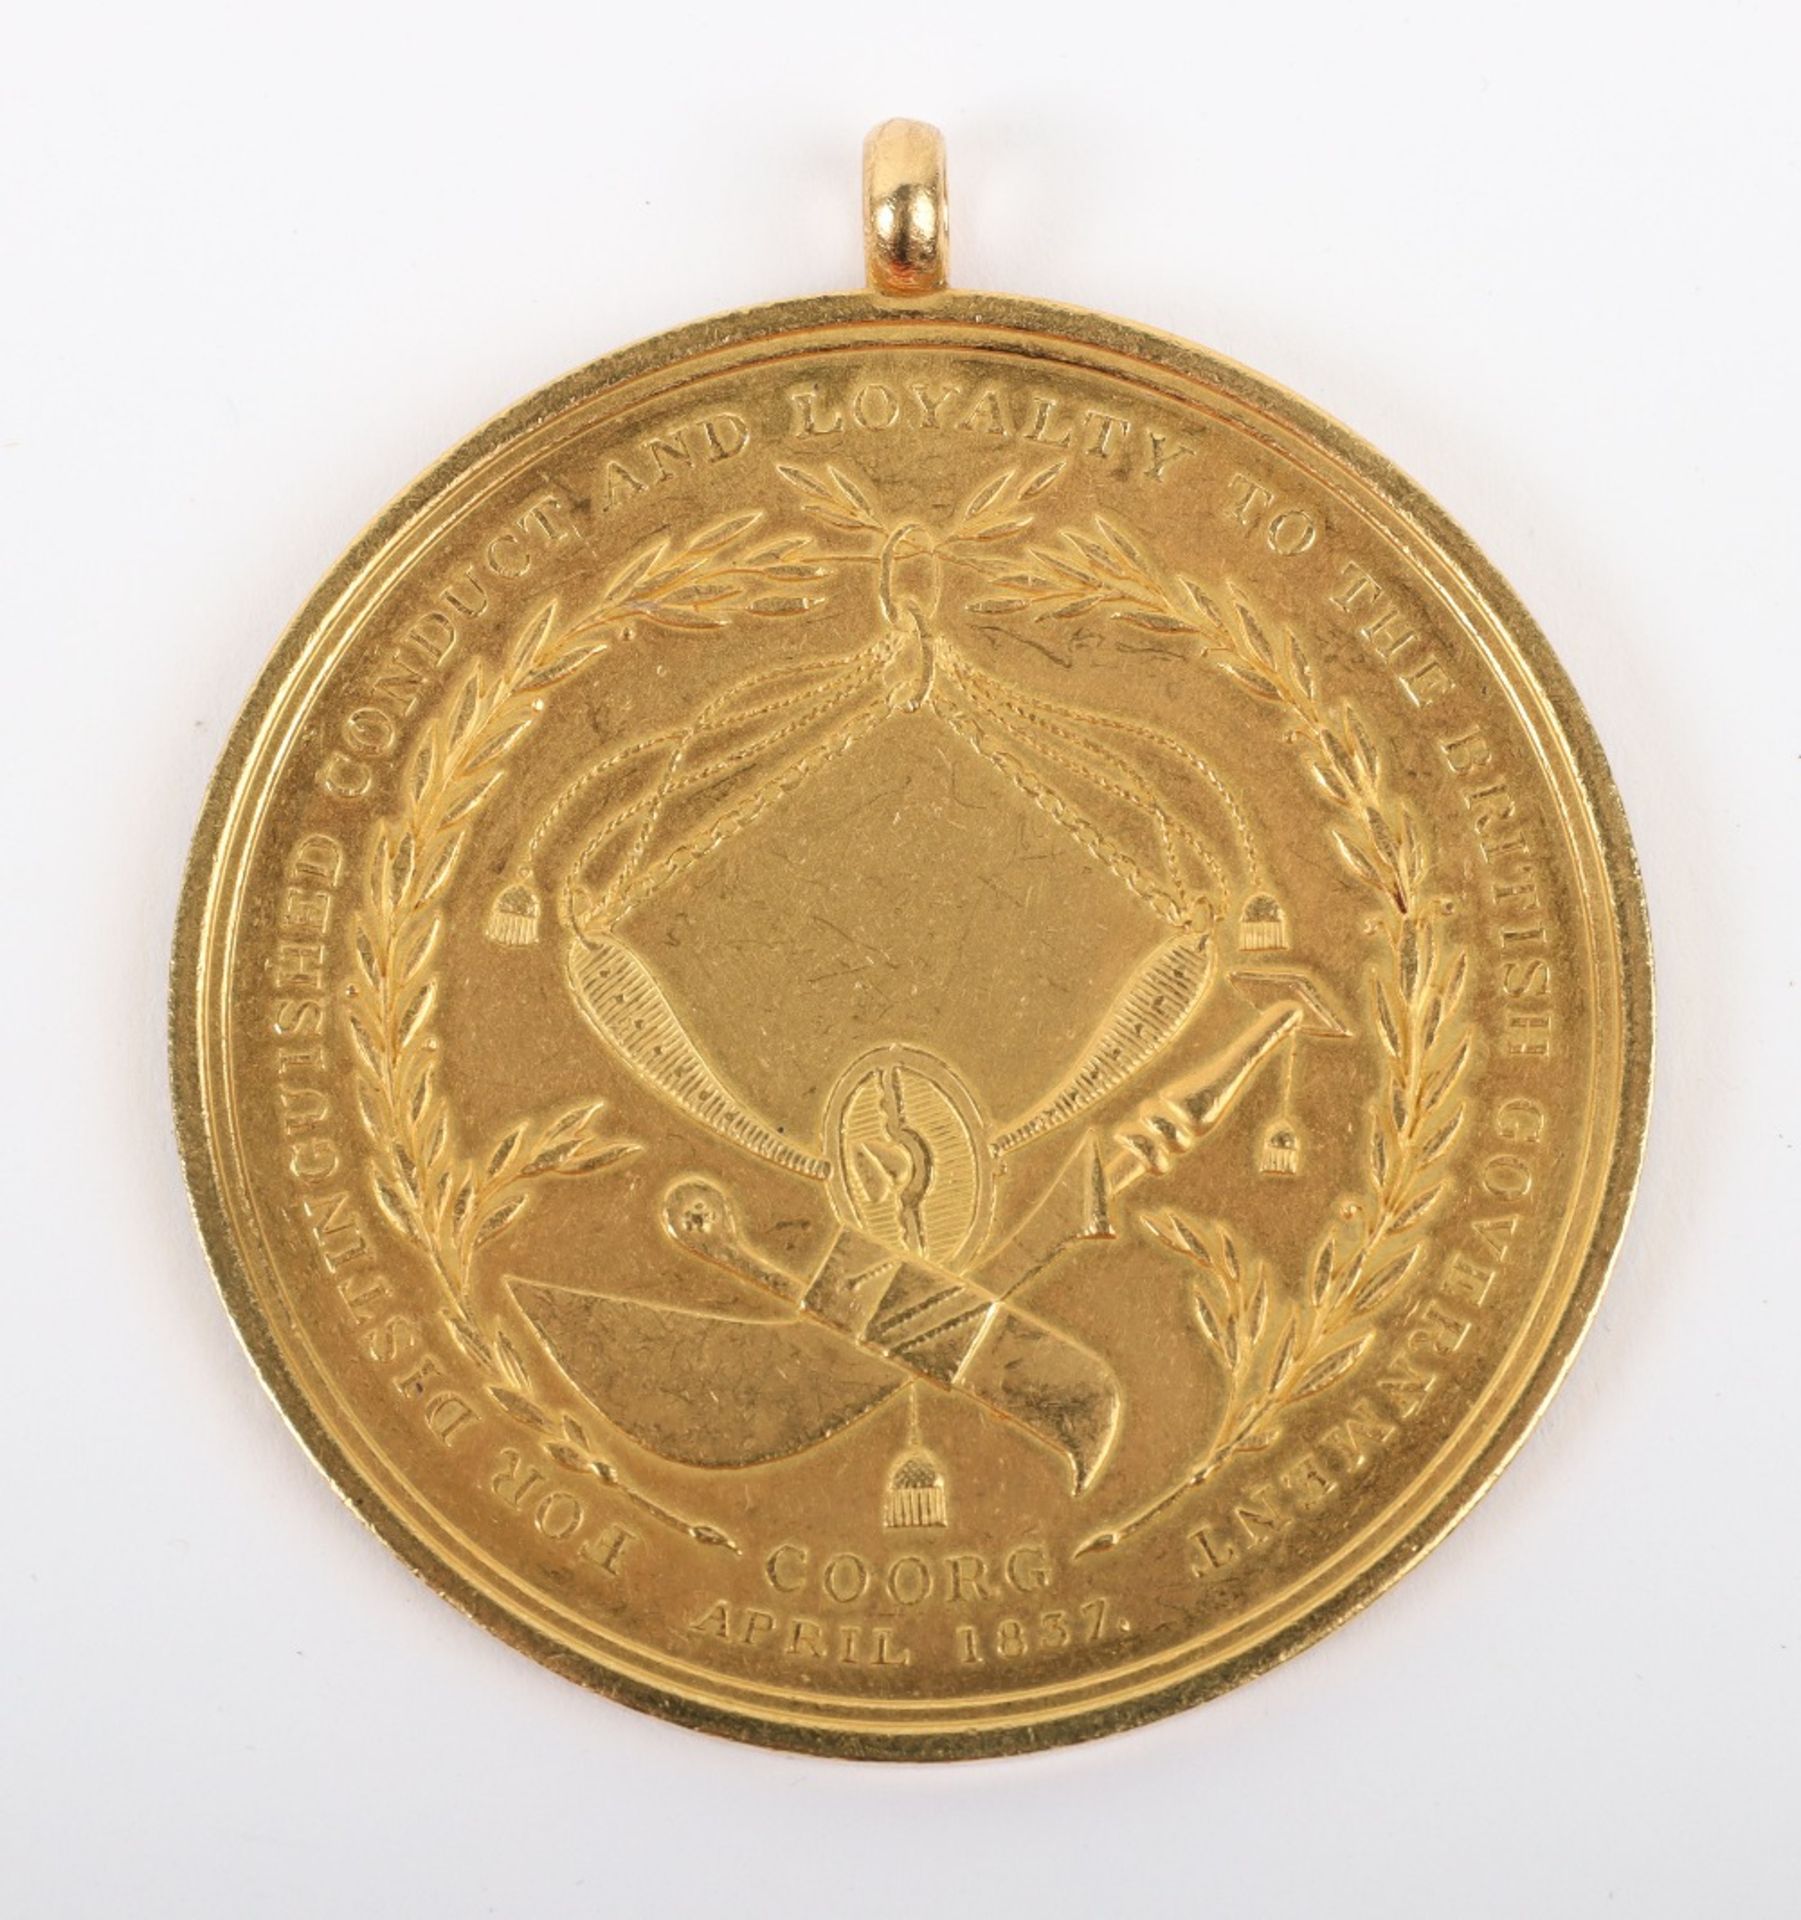 Rare Honourable East India Company Medal for the Coorg Rebellion 1837, 3rd Class Gold Medal (4 Tolas - Image 2 of 5